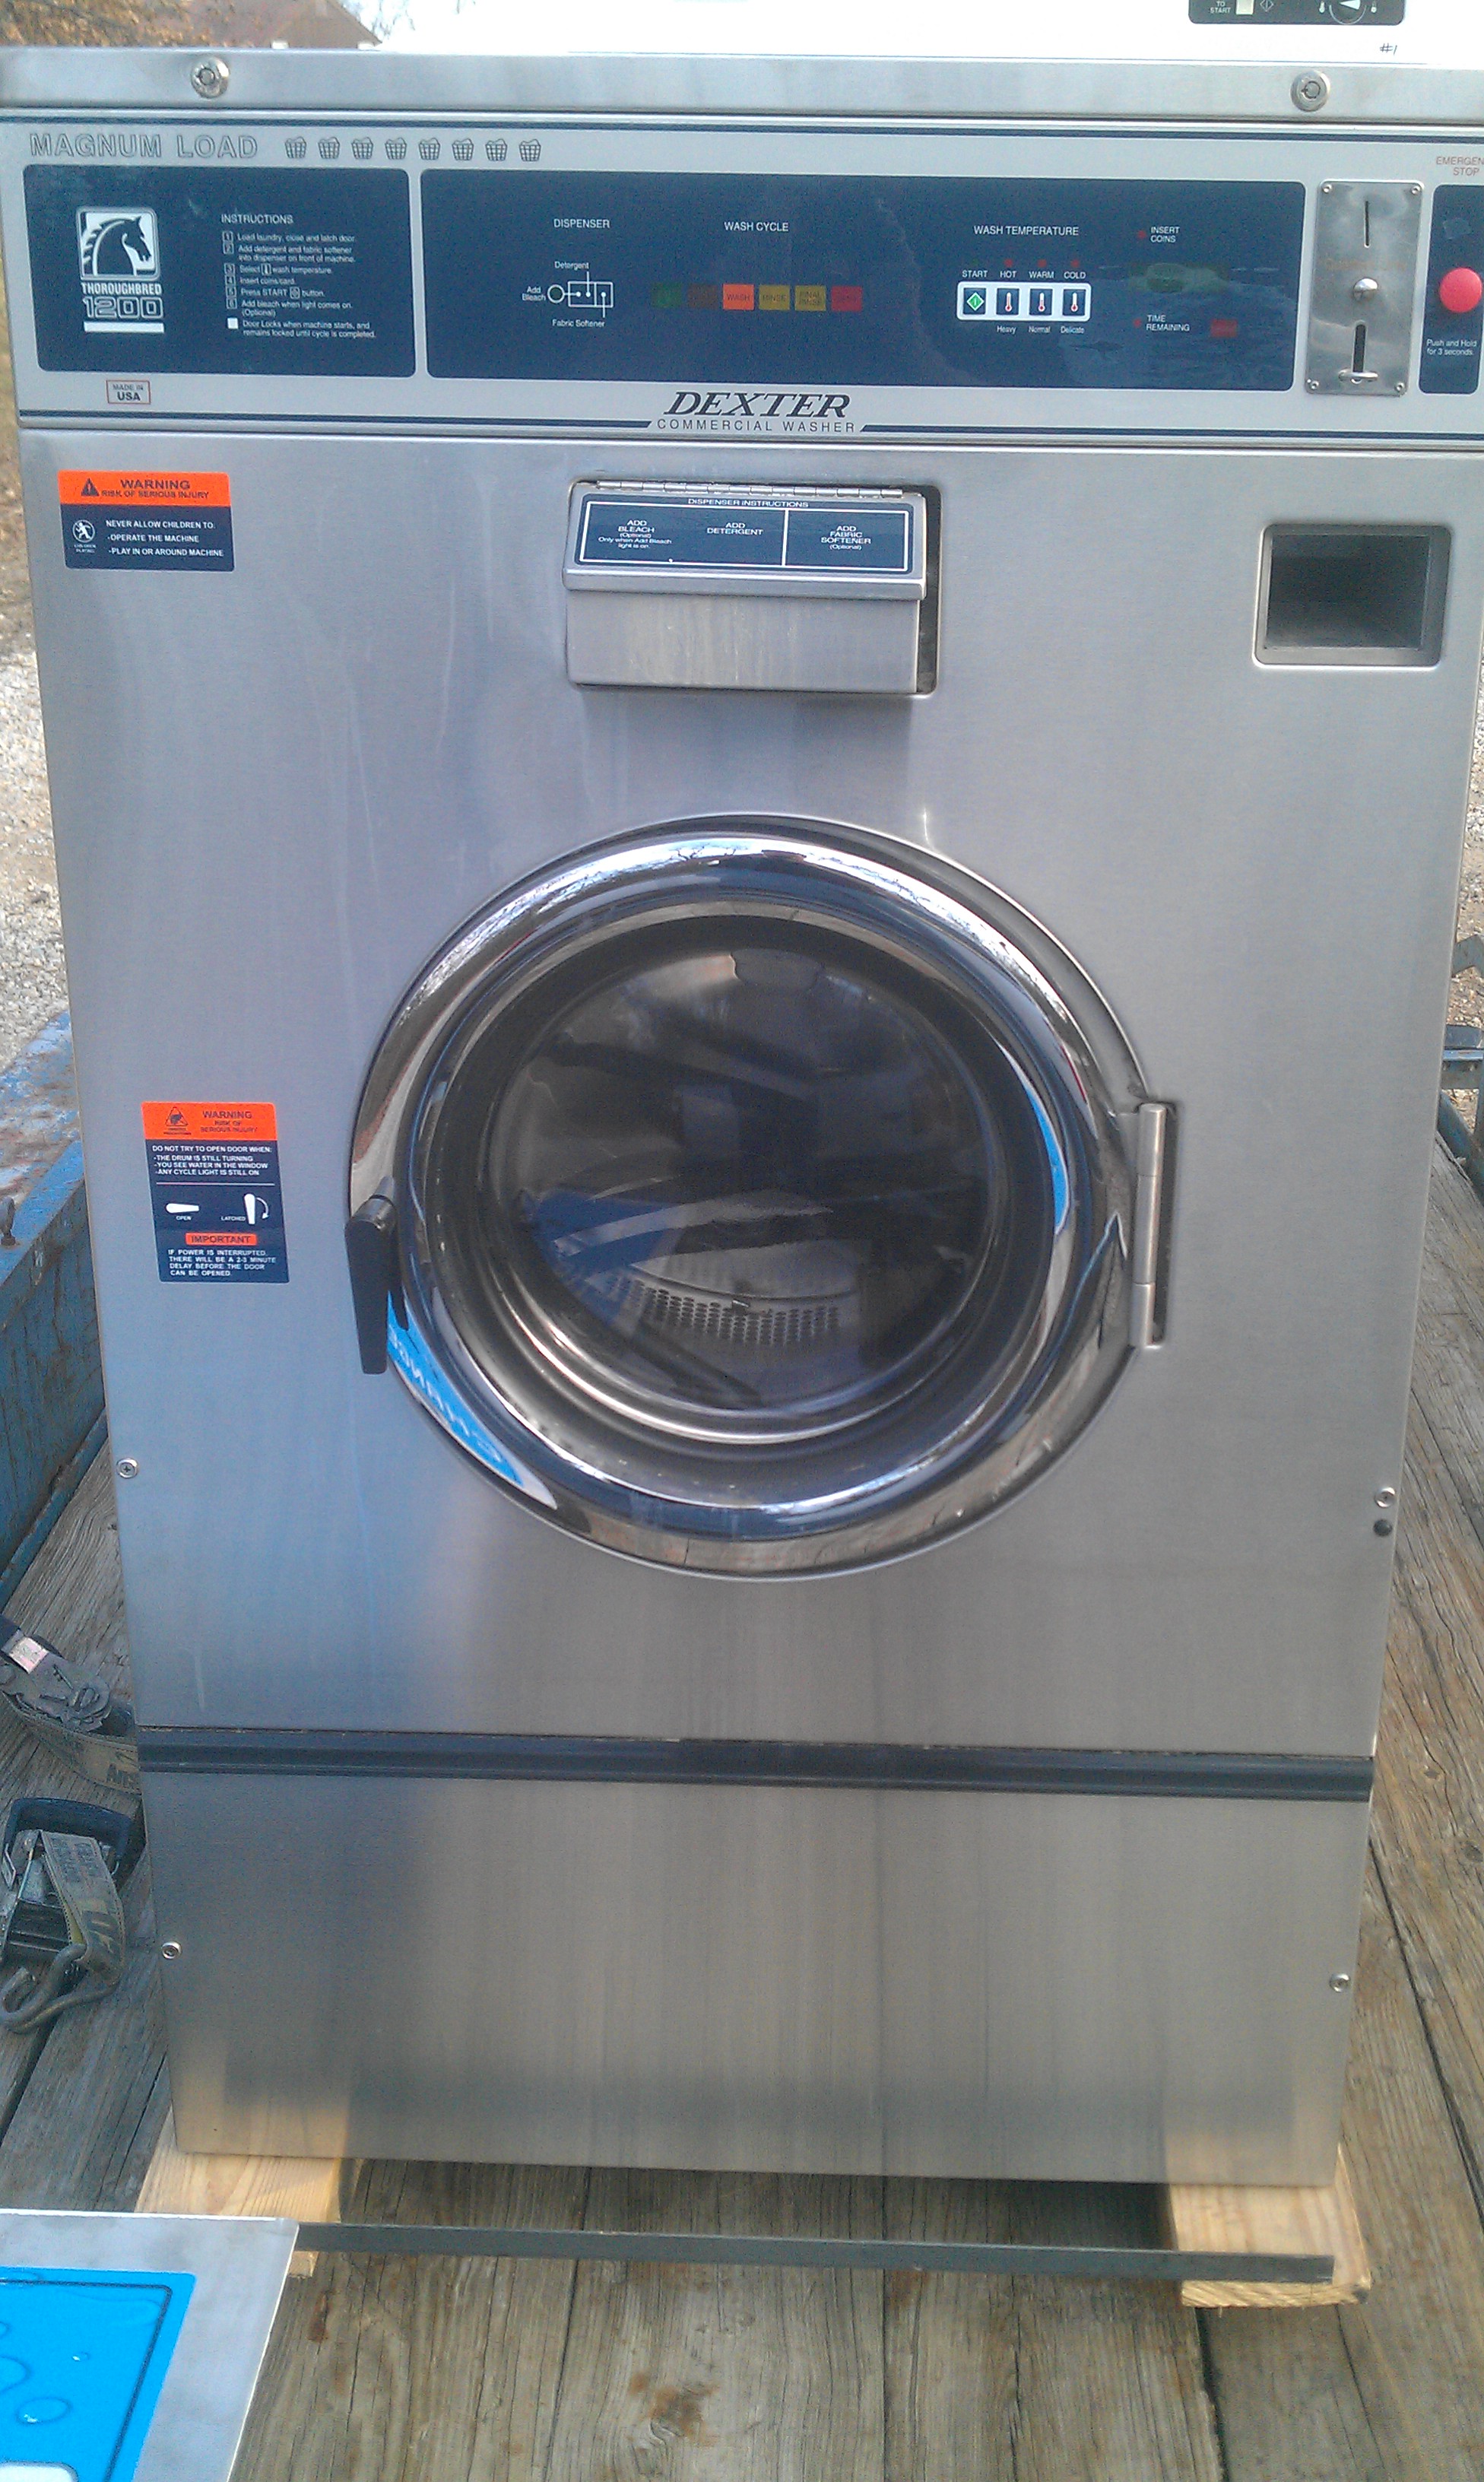 Dexter T1200 Coin Operated Washer